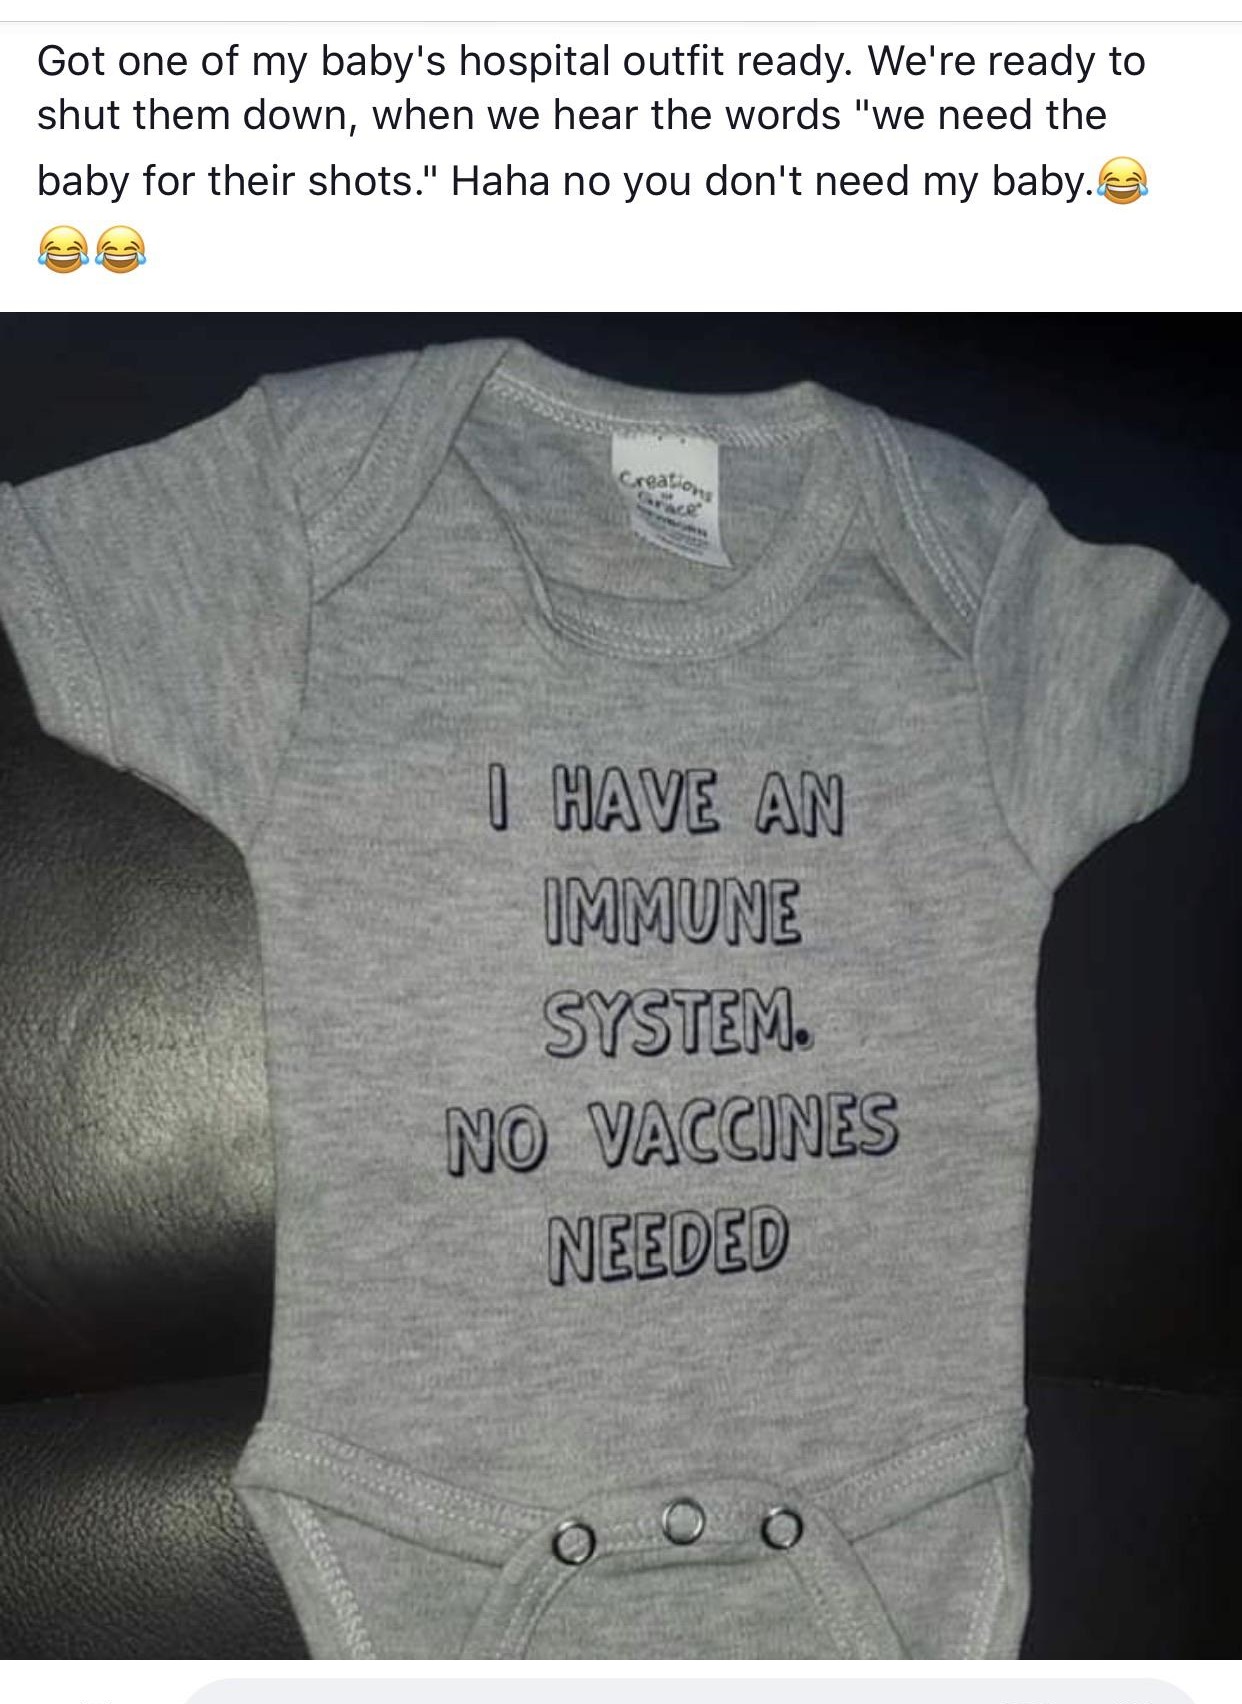 t shirt - Got one of my baby's hospital outfit ready. We're ready to shut them down, when we hear the words "we need the baby for their shots." Haha no you don't need my baby. I Have An Immune System. No Vaccines Needed